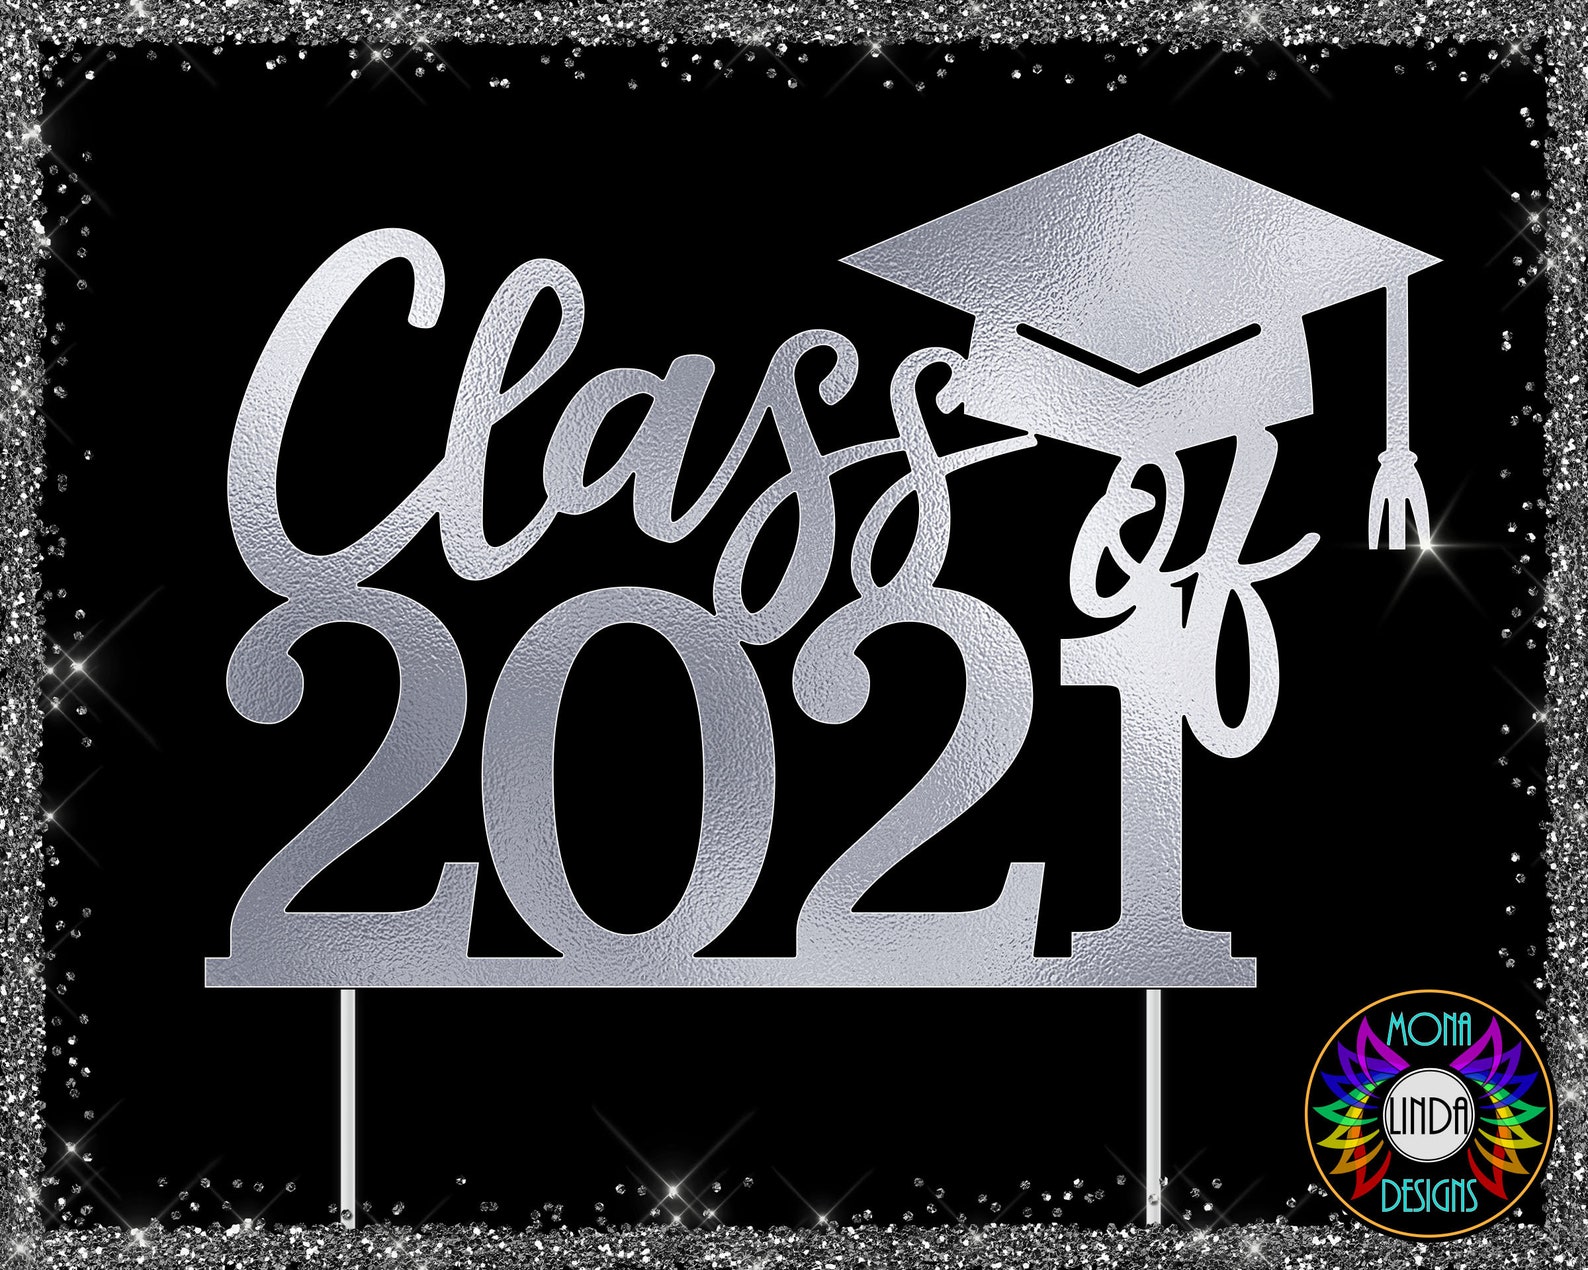 Download Cake Topper Class of 2021 svg dxf jpg png files | Etsy